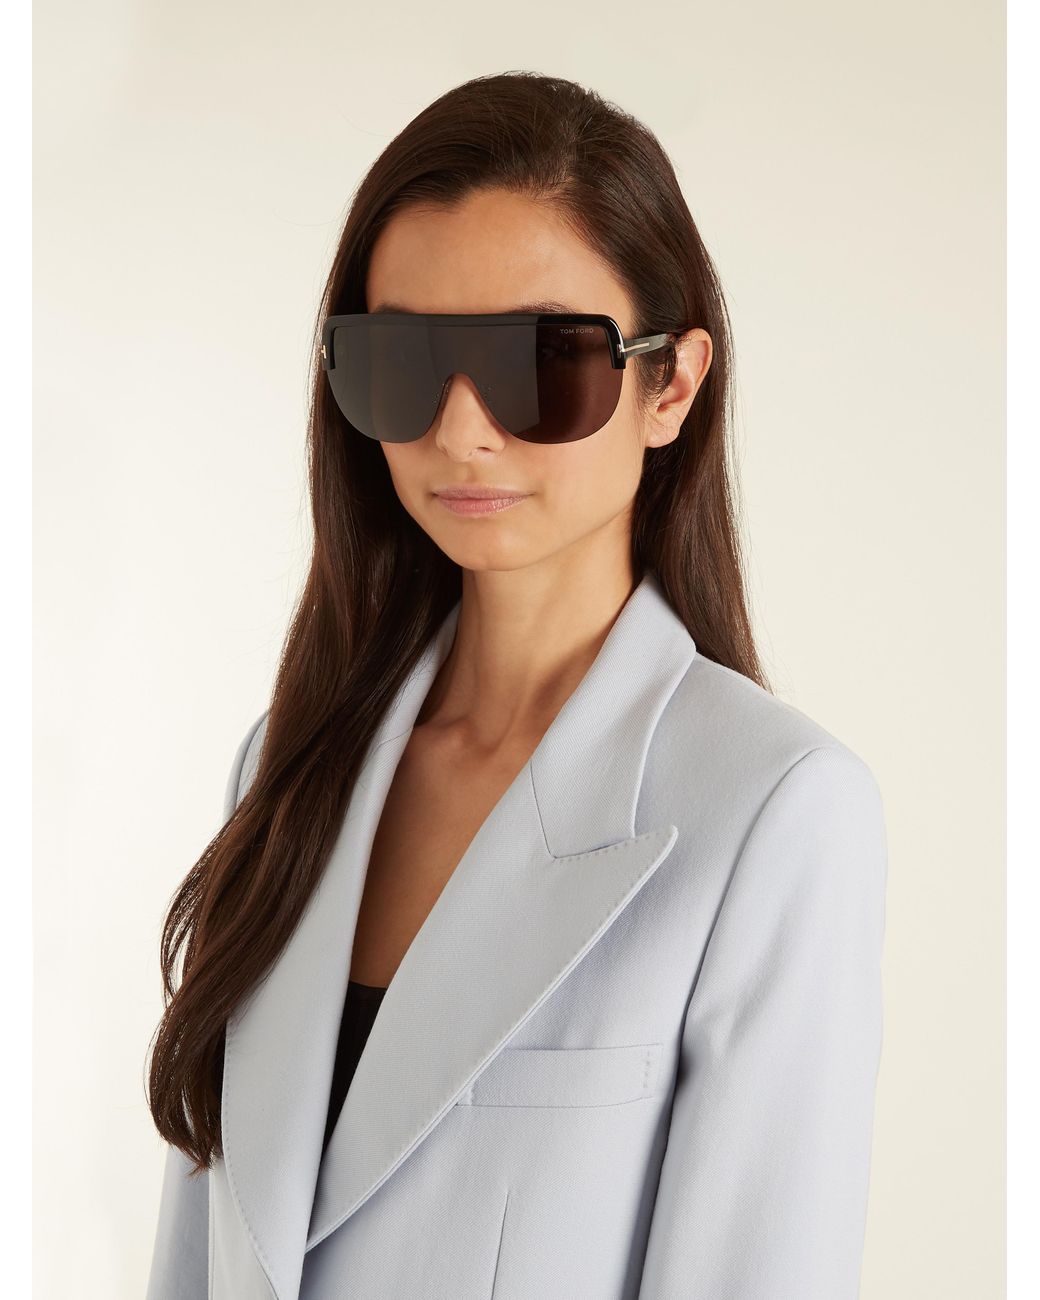 Tom Ford Angus Shield Sunglasses in Black | Lyst